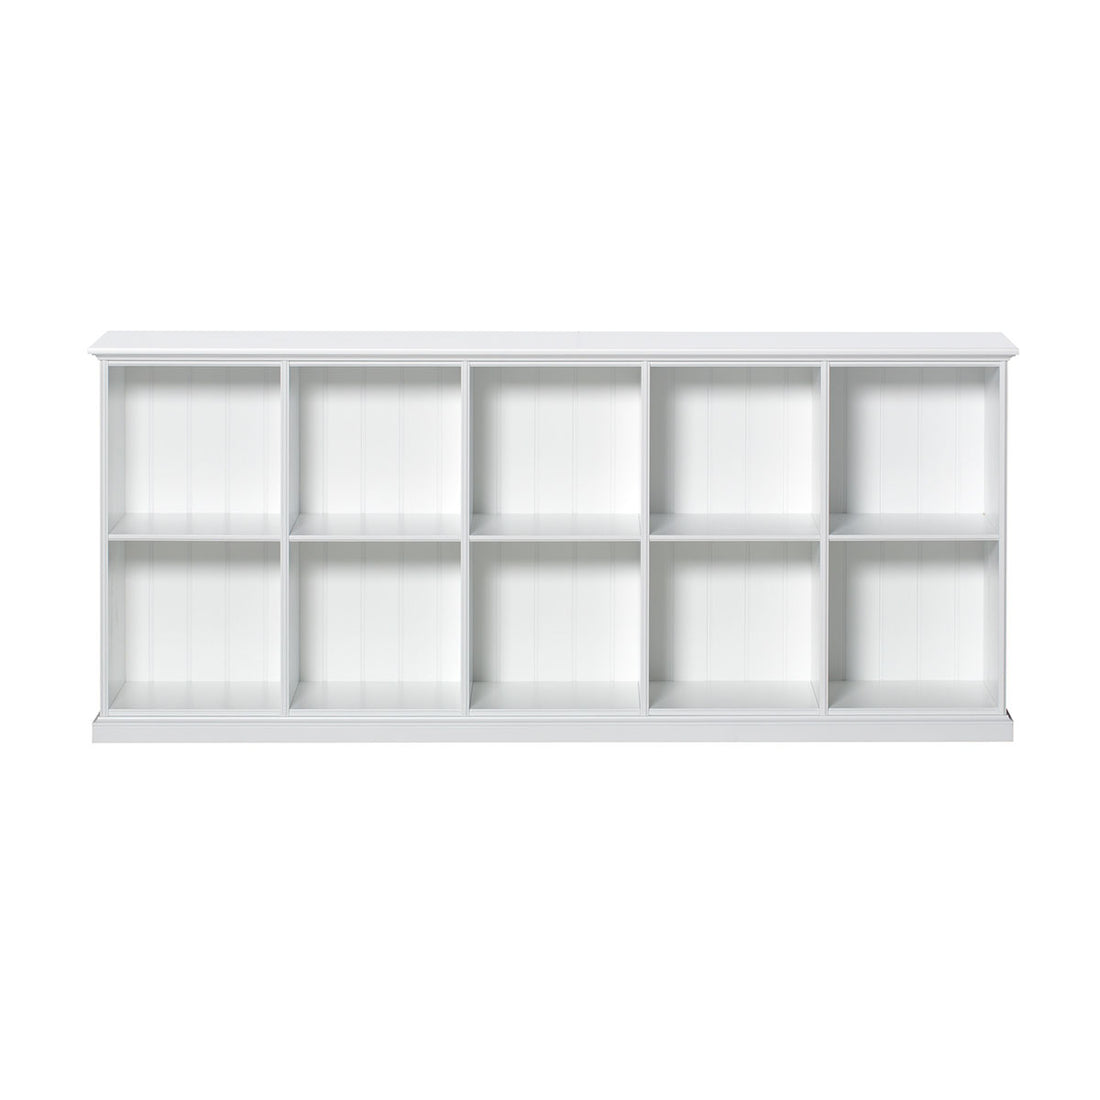 oliver-furniture-seaside-shelving-unit-low-cabinet-with-10-rooms- (1)